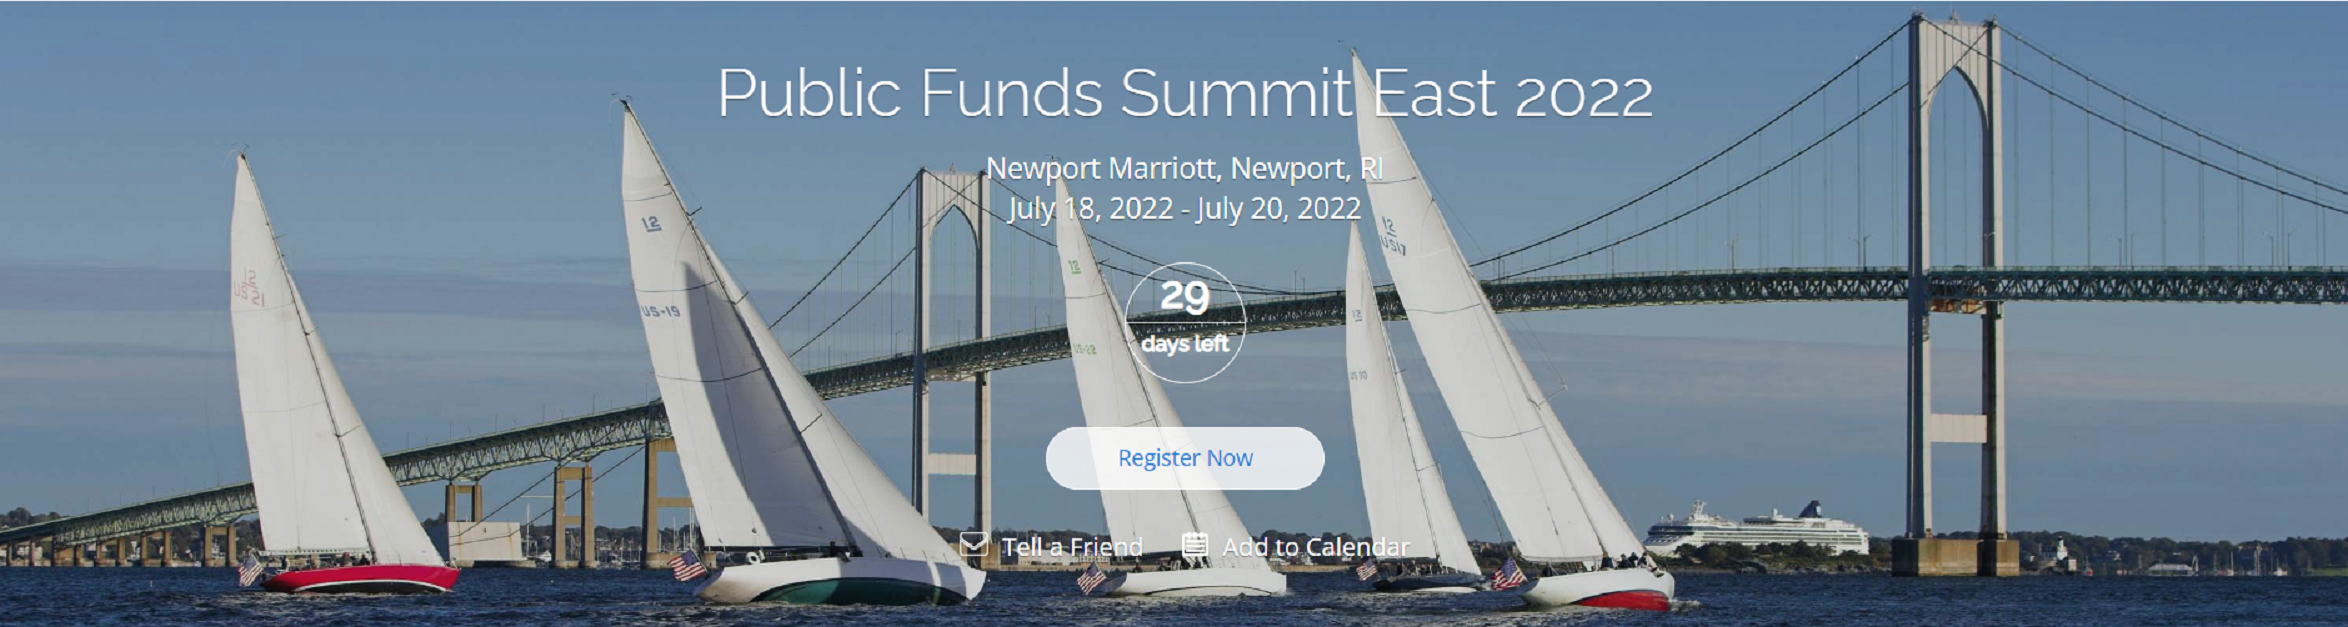 The Public Funds Summit East 